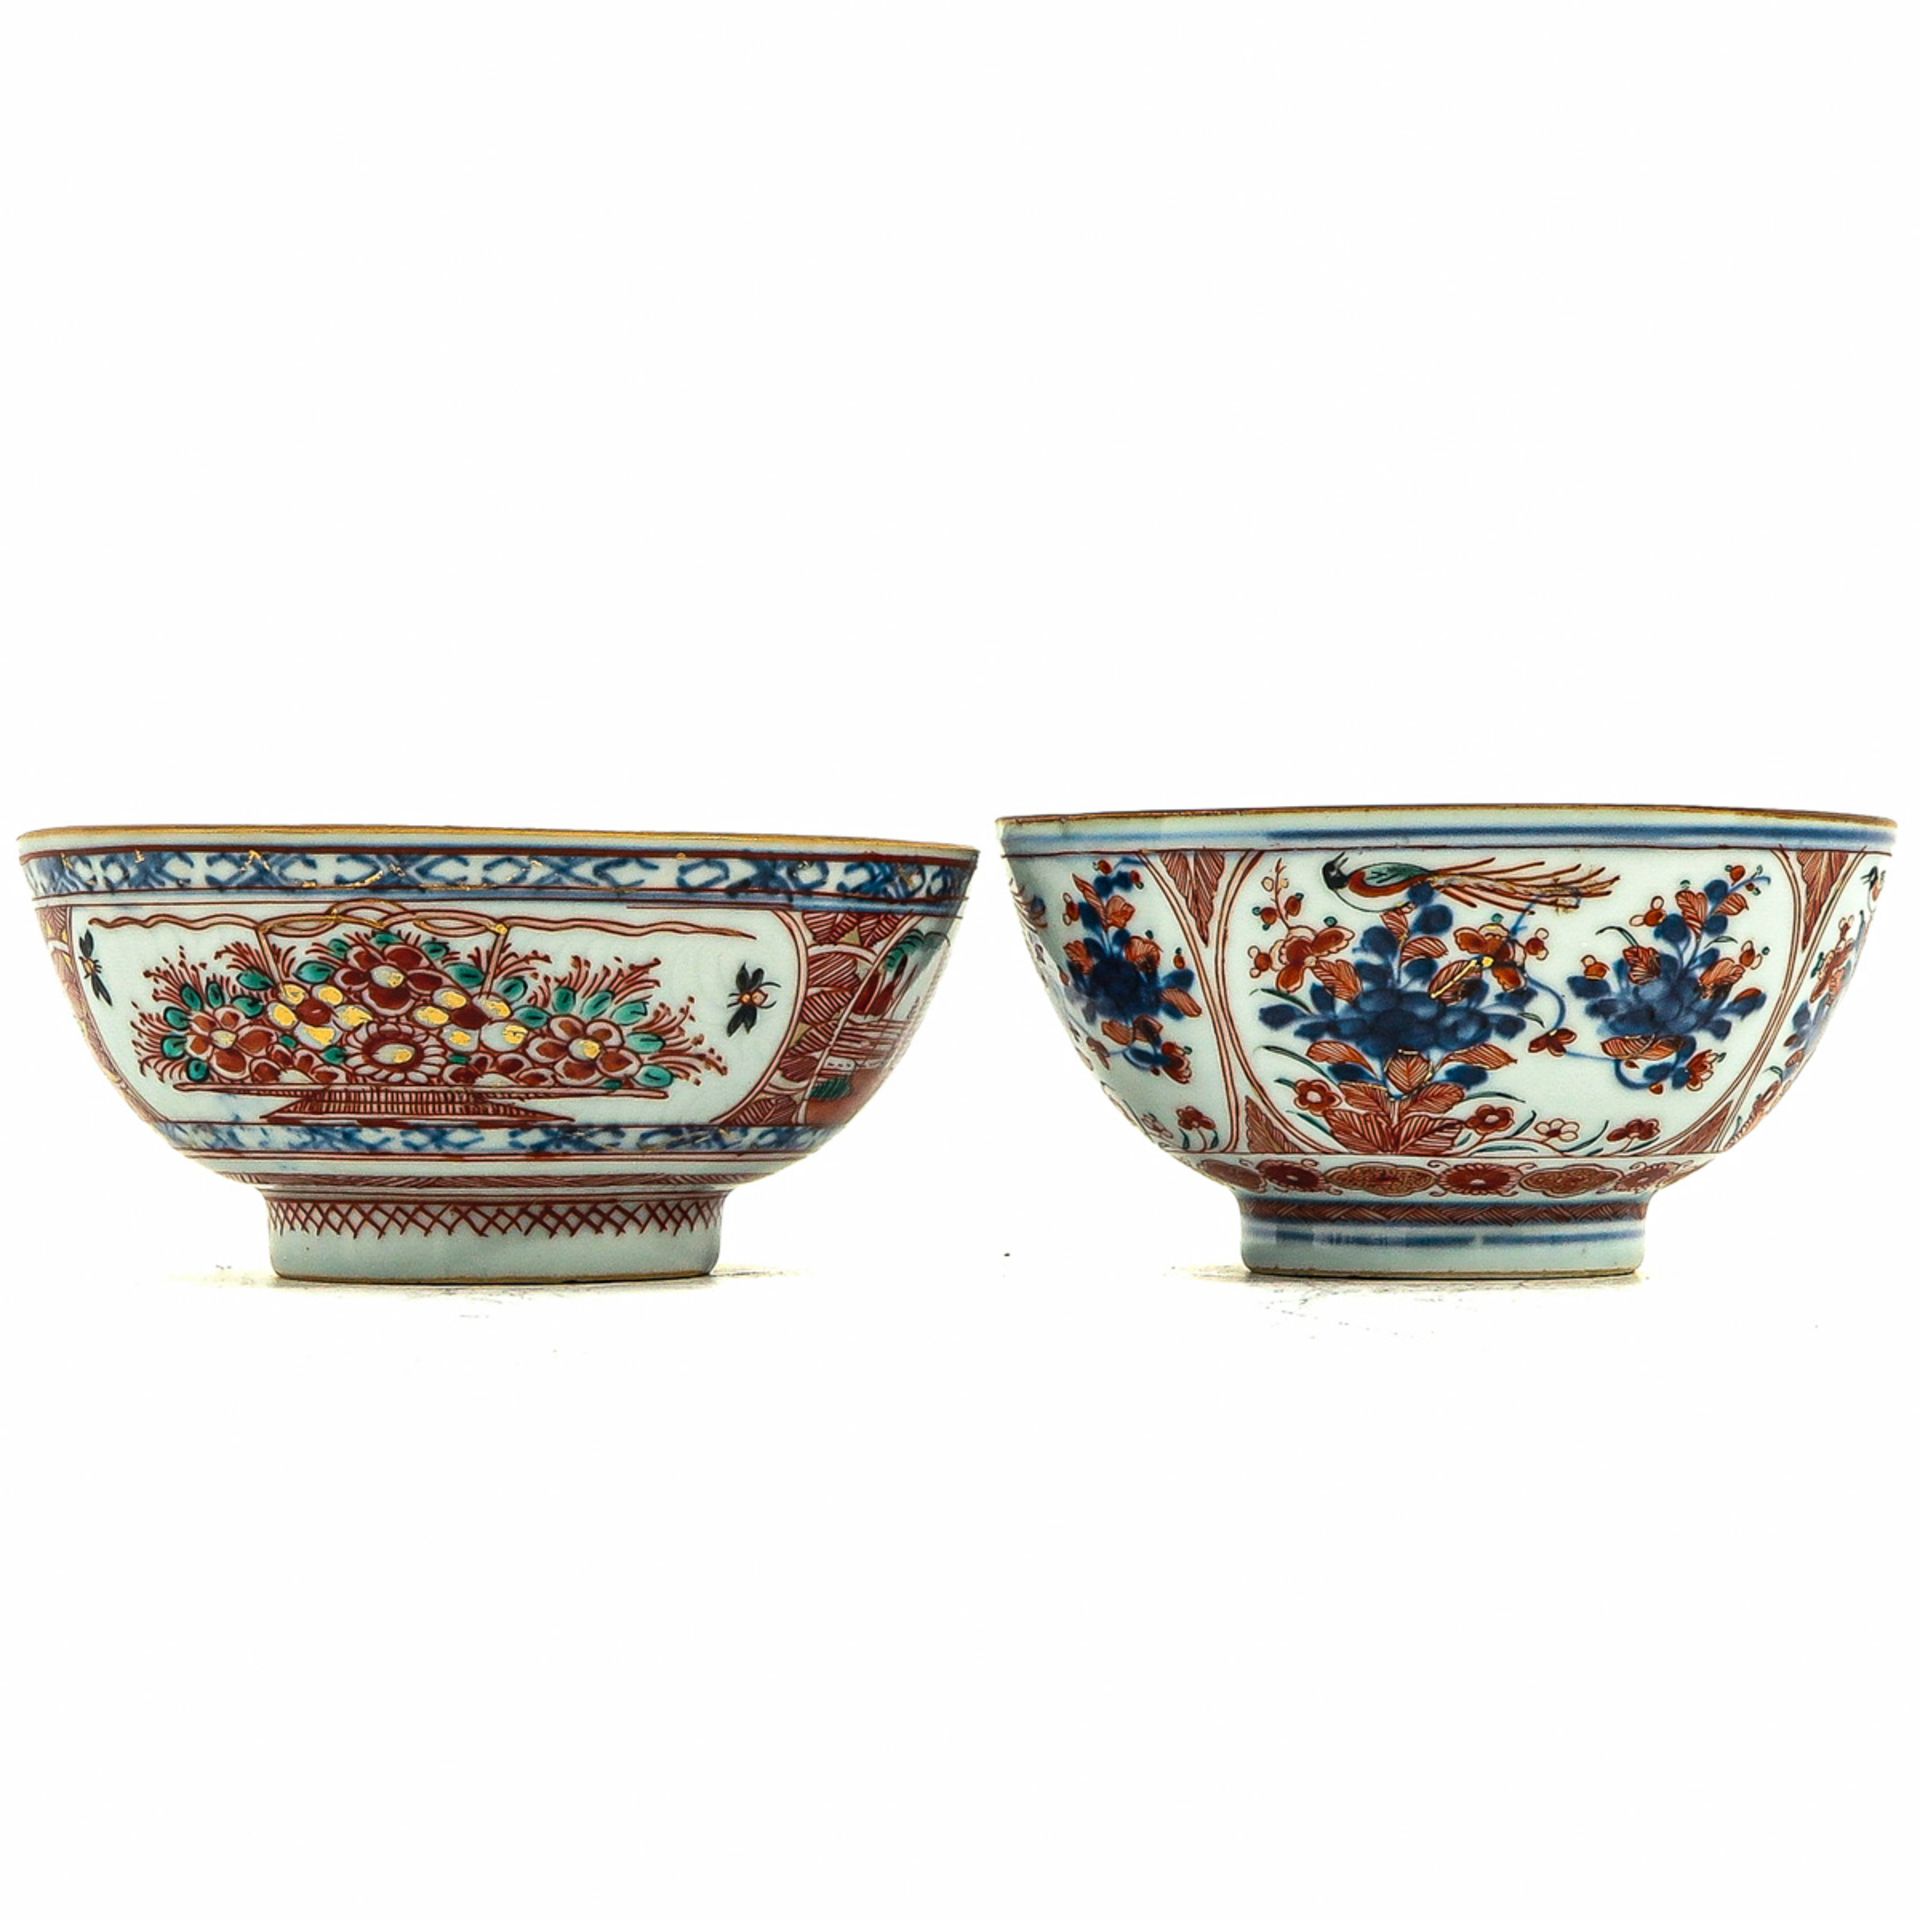 A Lot of 2 Polychrome Bowls - Image 3 of 6